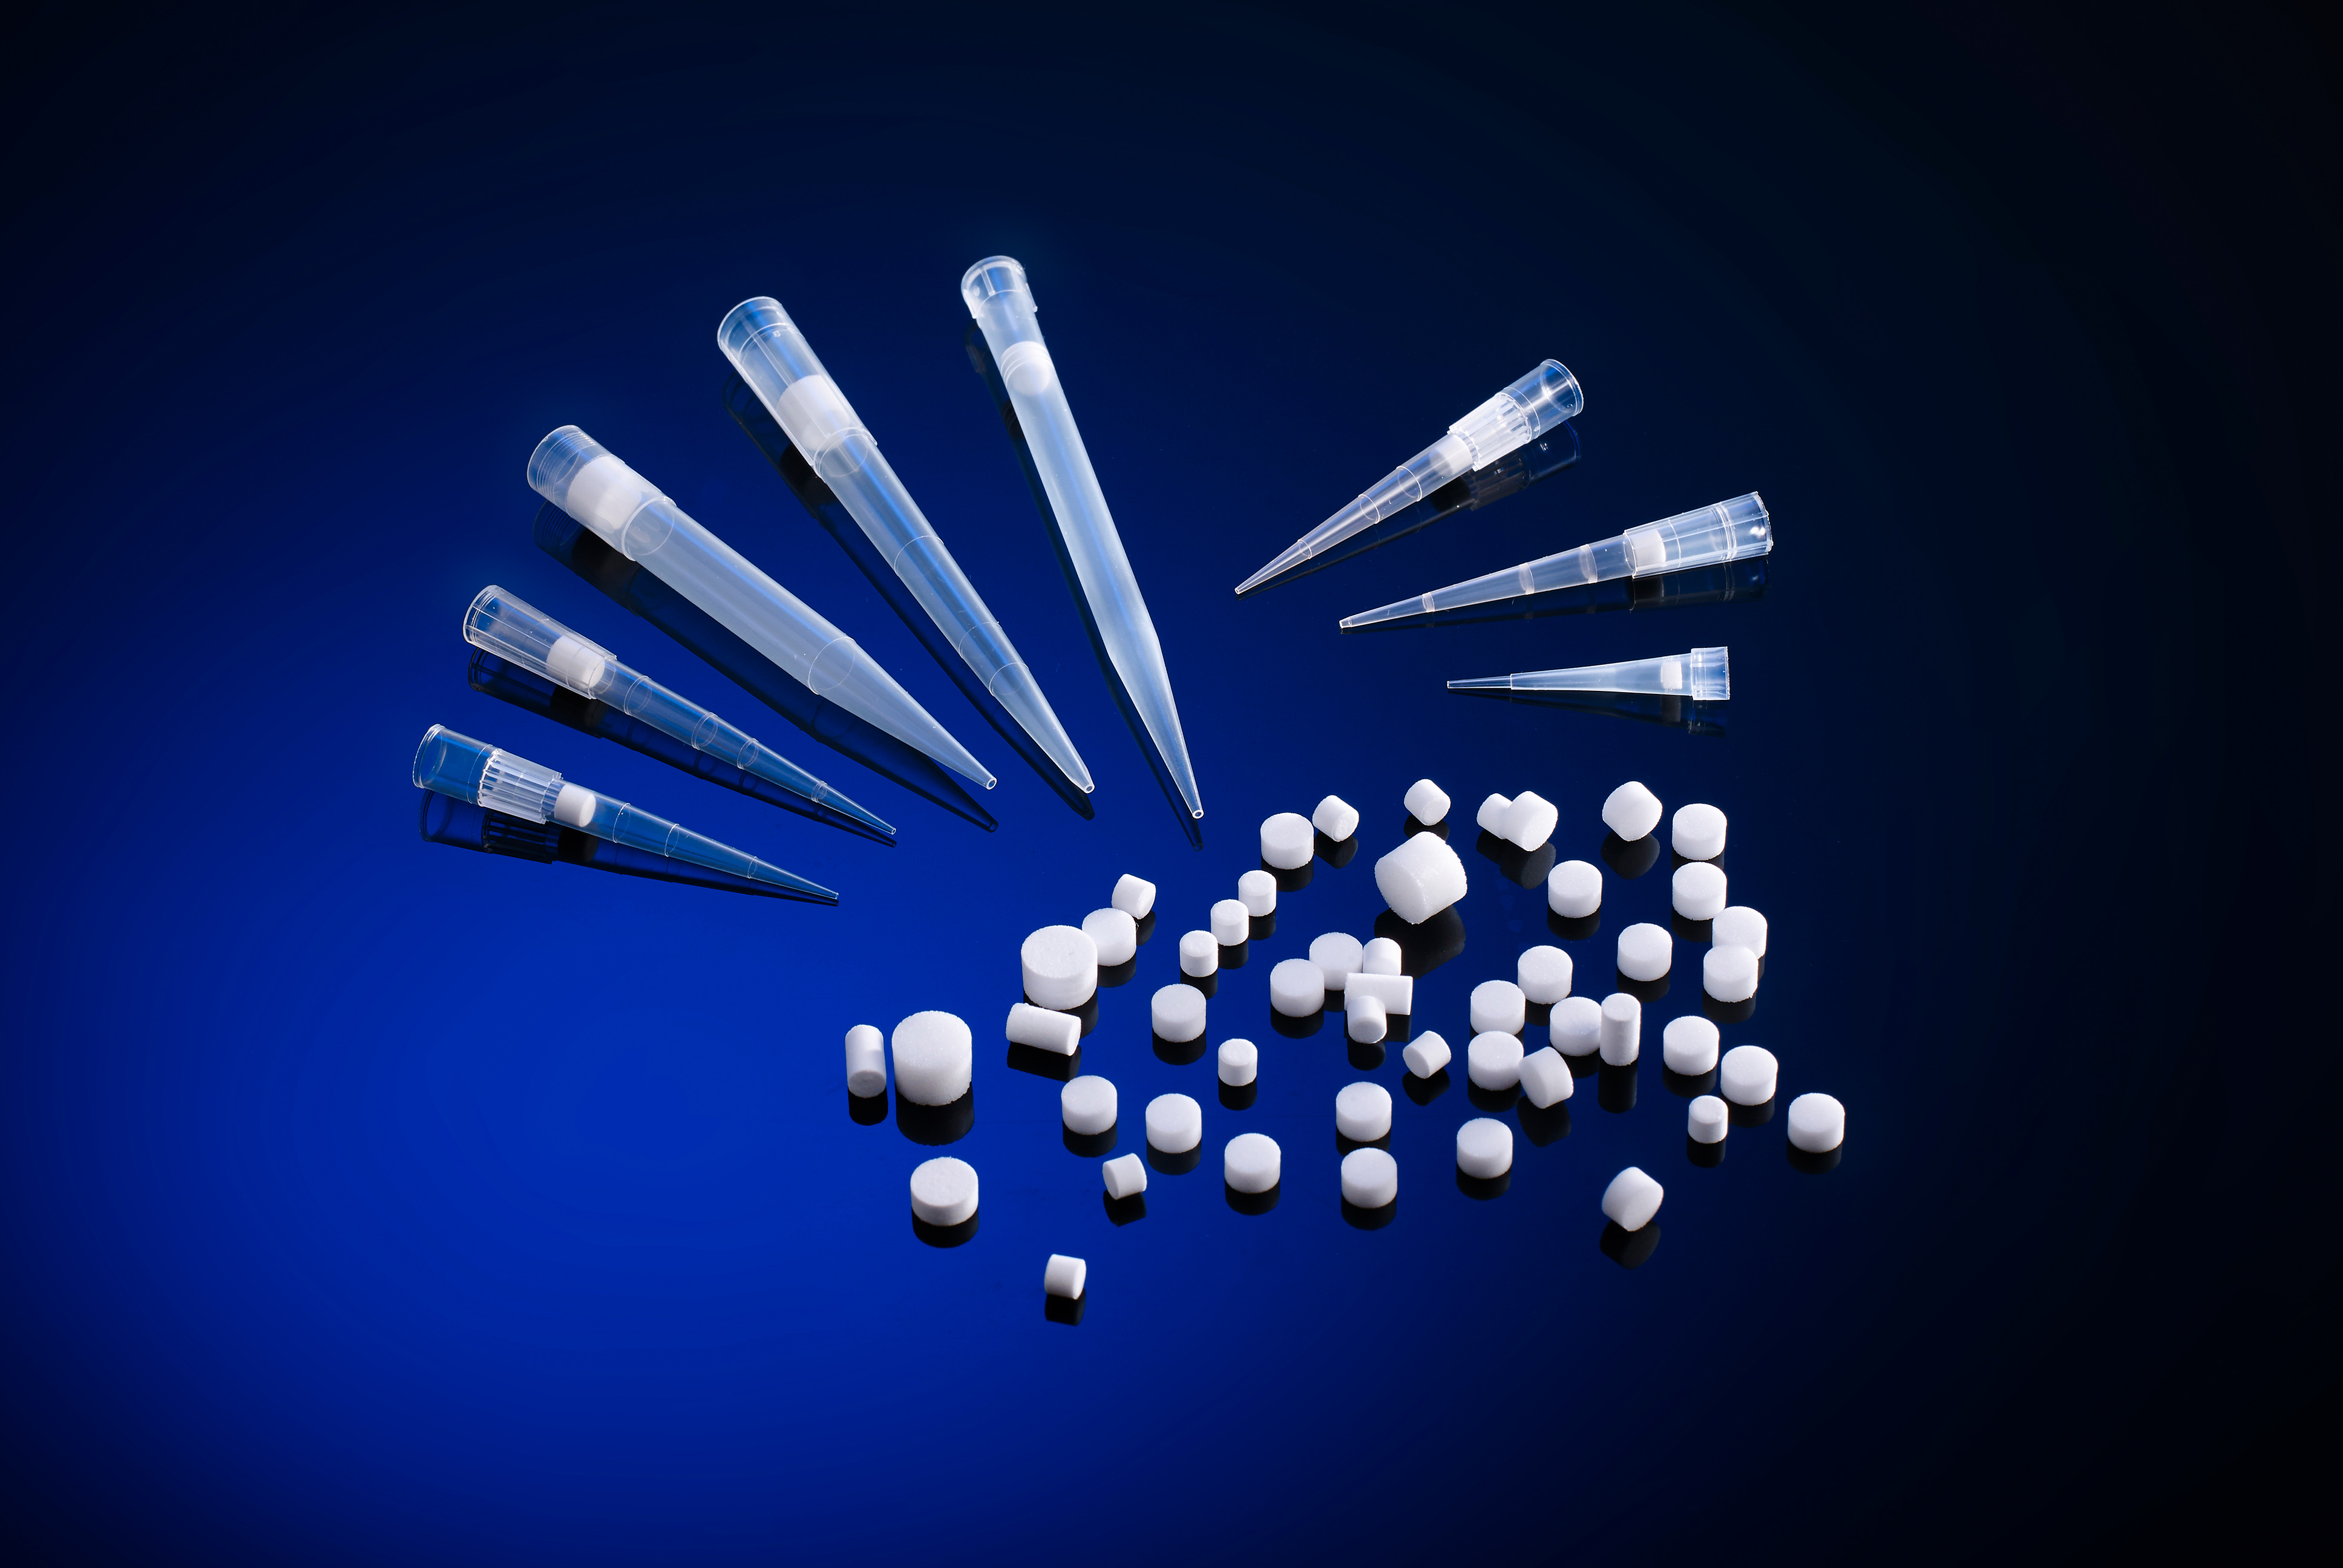 Porvair Sciences has launched a new range of Liquid Handling Pipette Tip Filters